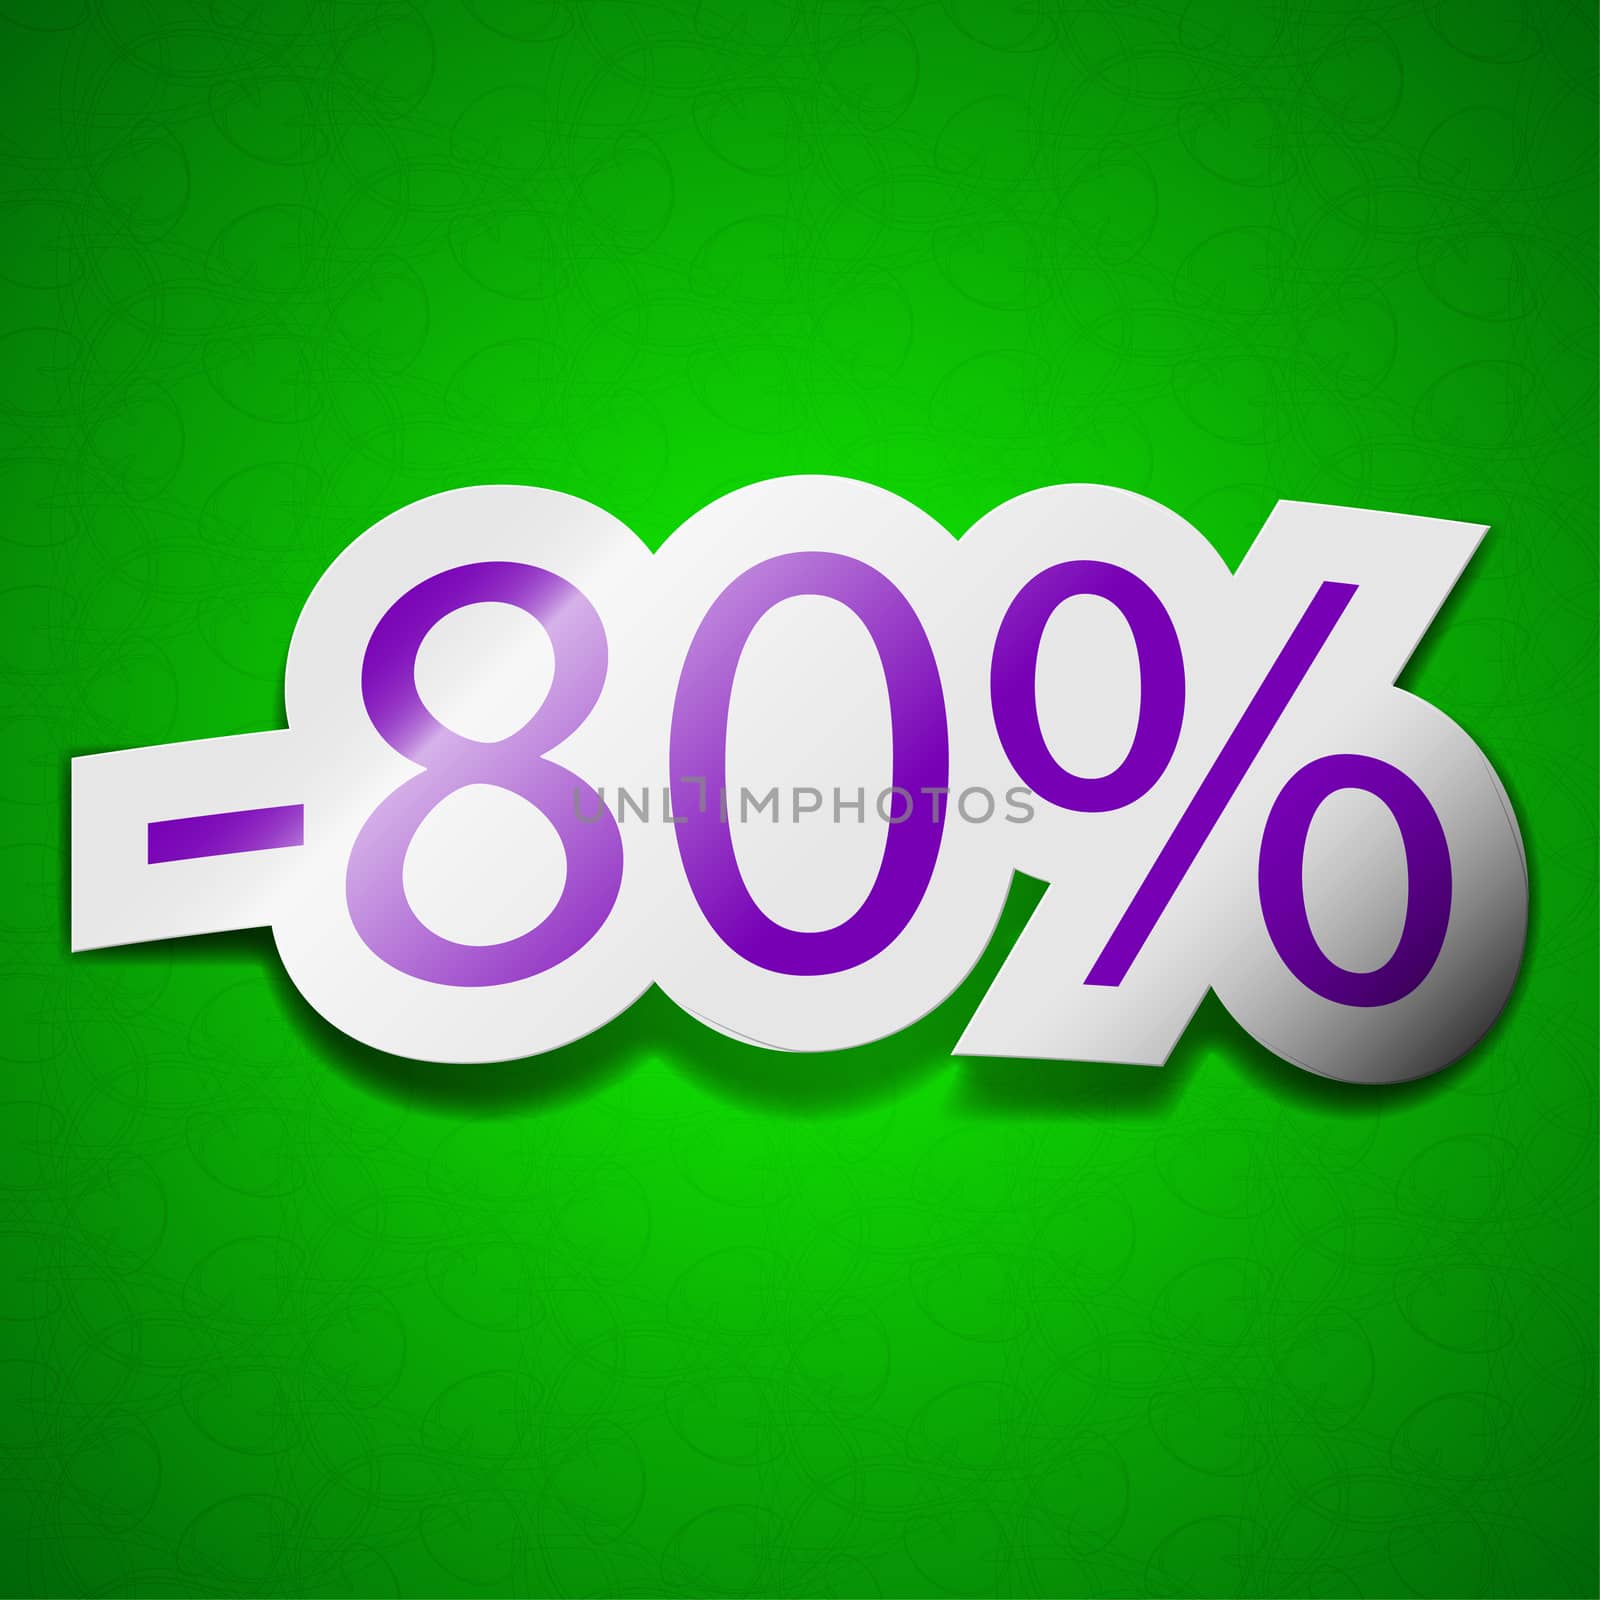 80 percent discount icon sign. Symbol chic colored sticky label on green background.  illustration